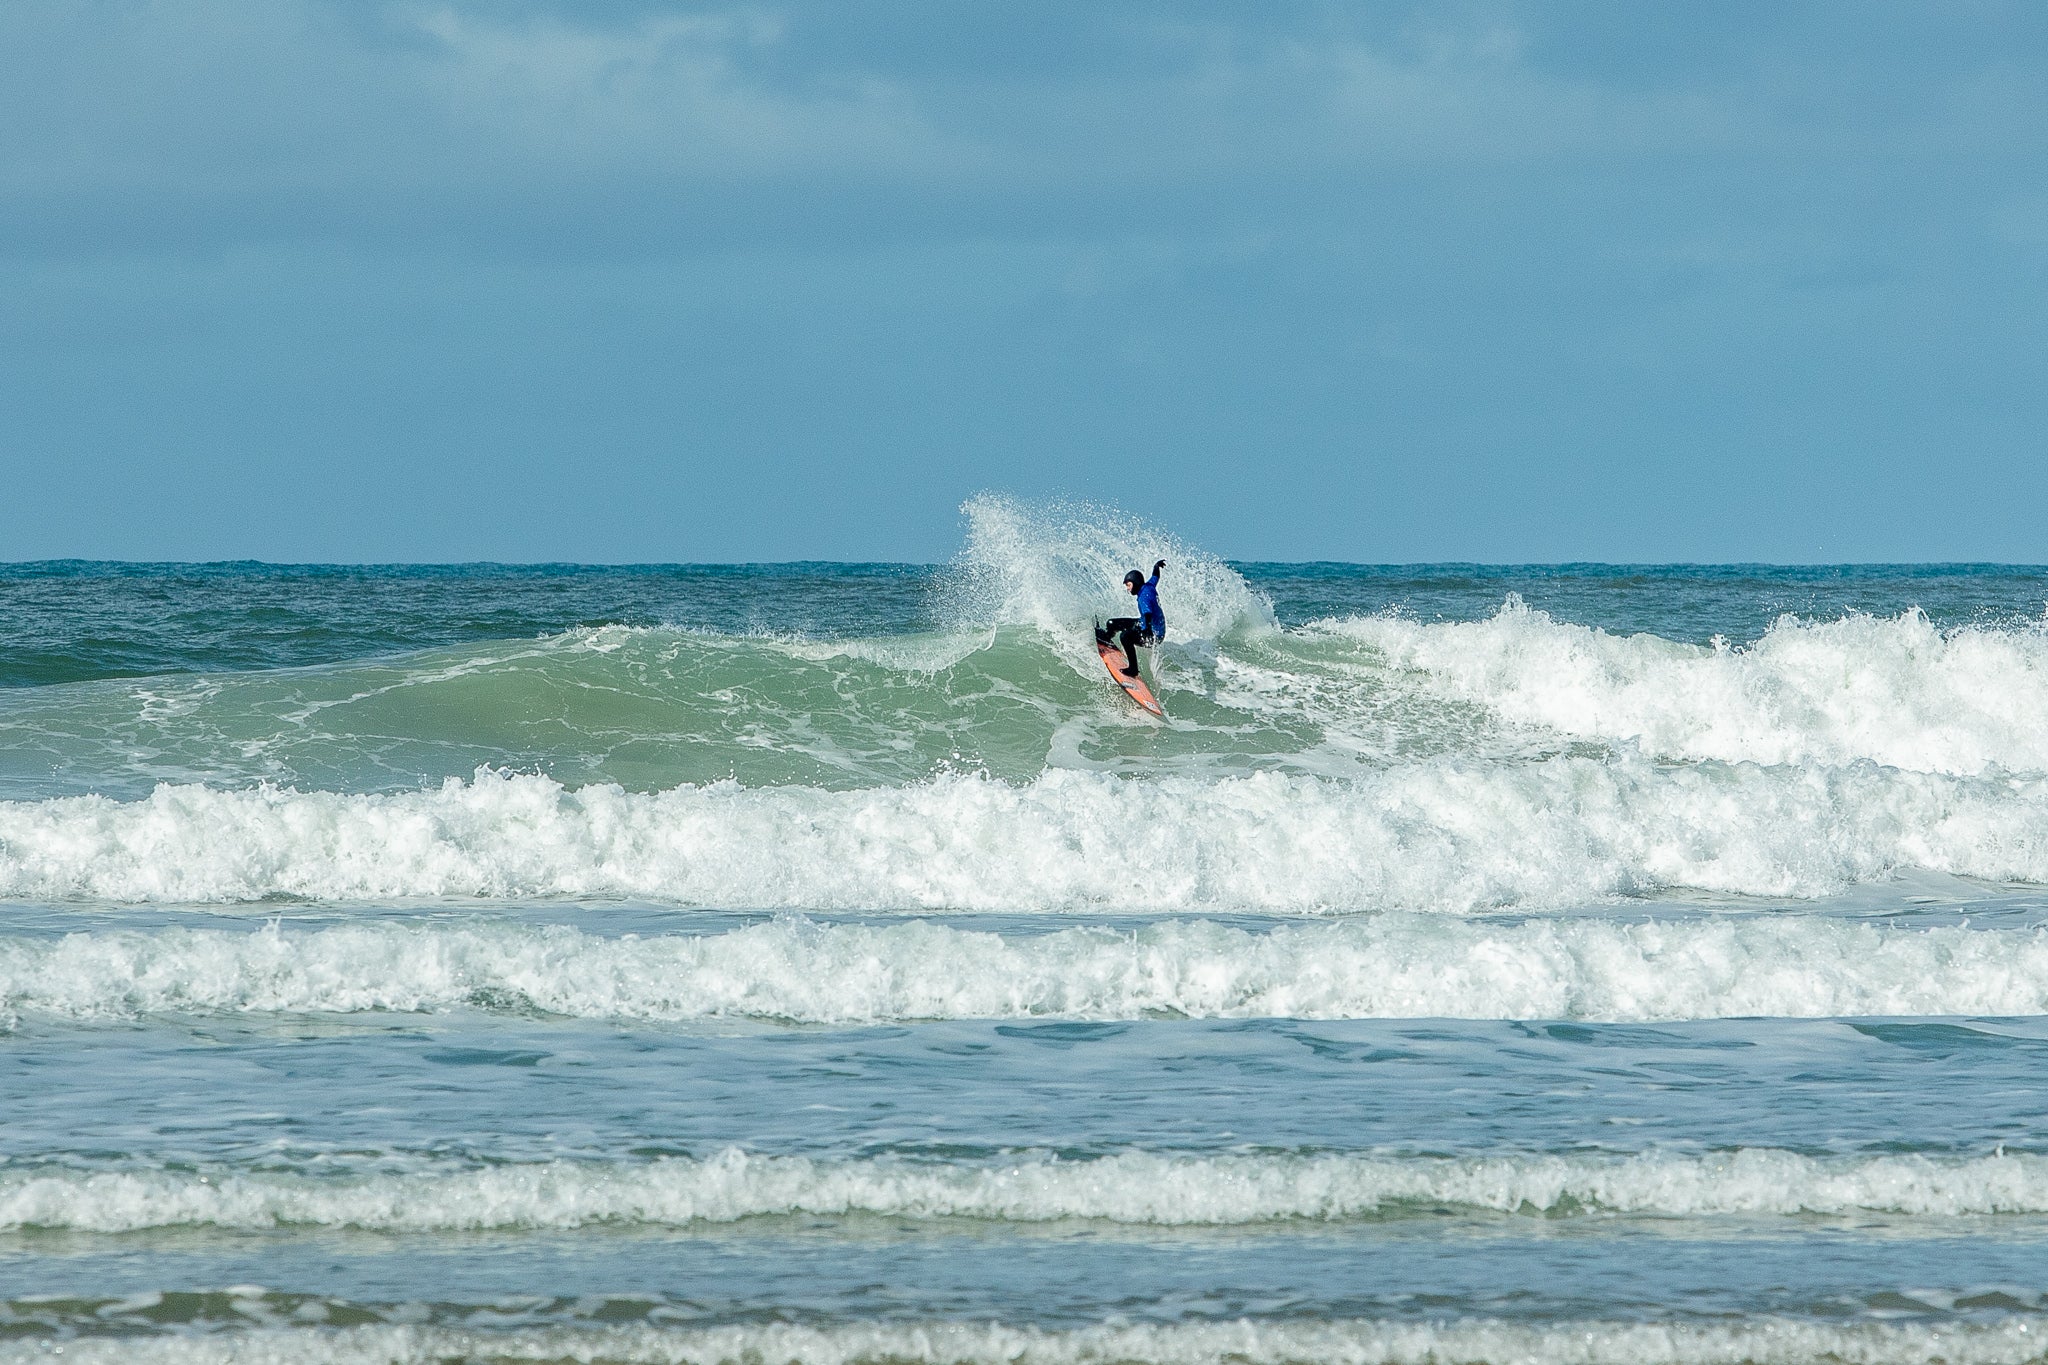 Action from the 2020 English Surf Champs